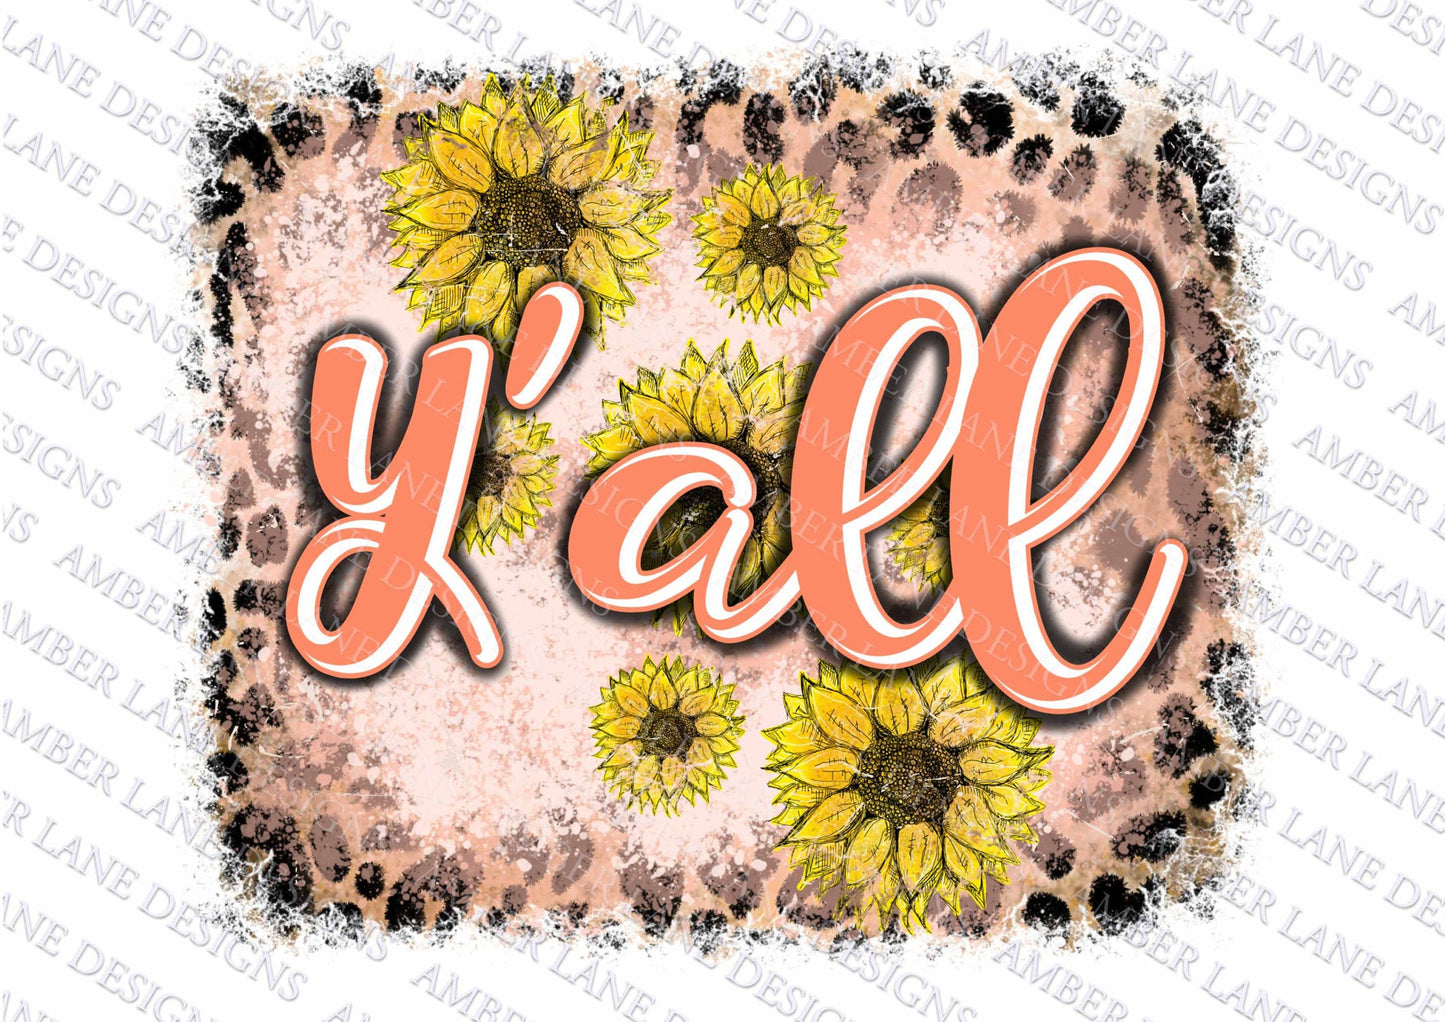 Y'all png , leopard sunflowers, distressed frame, png file